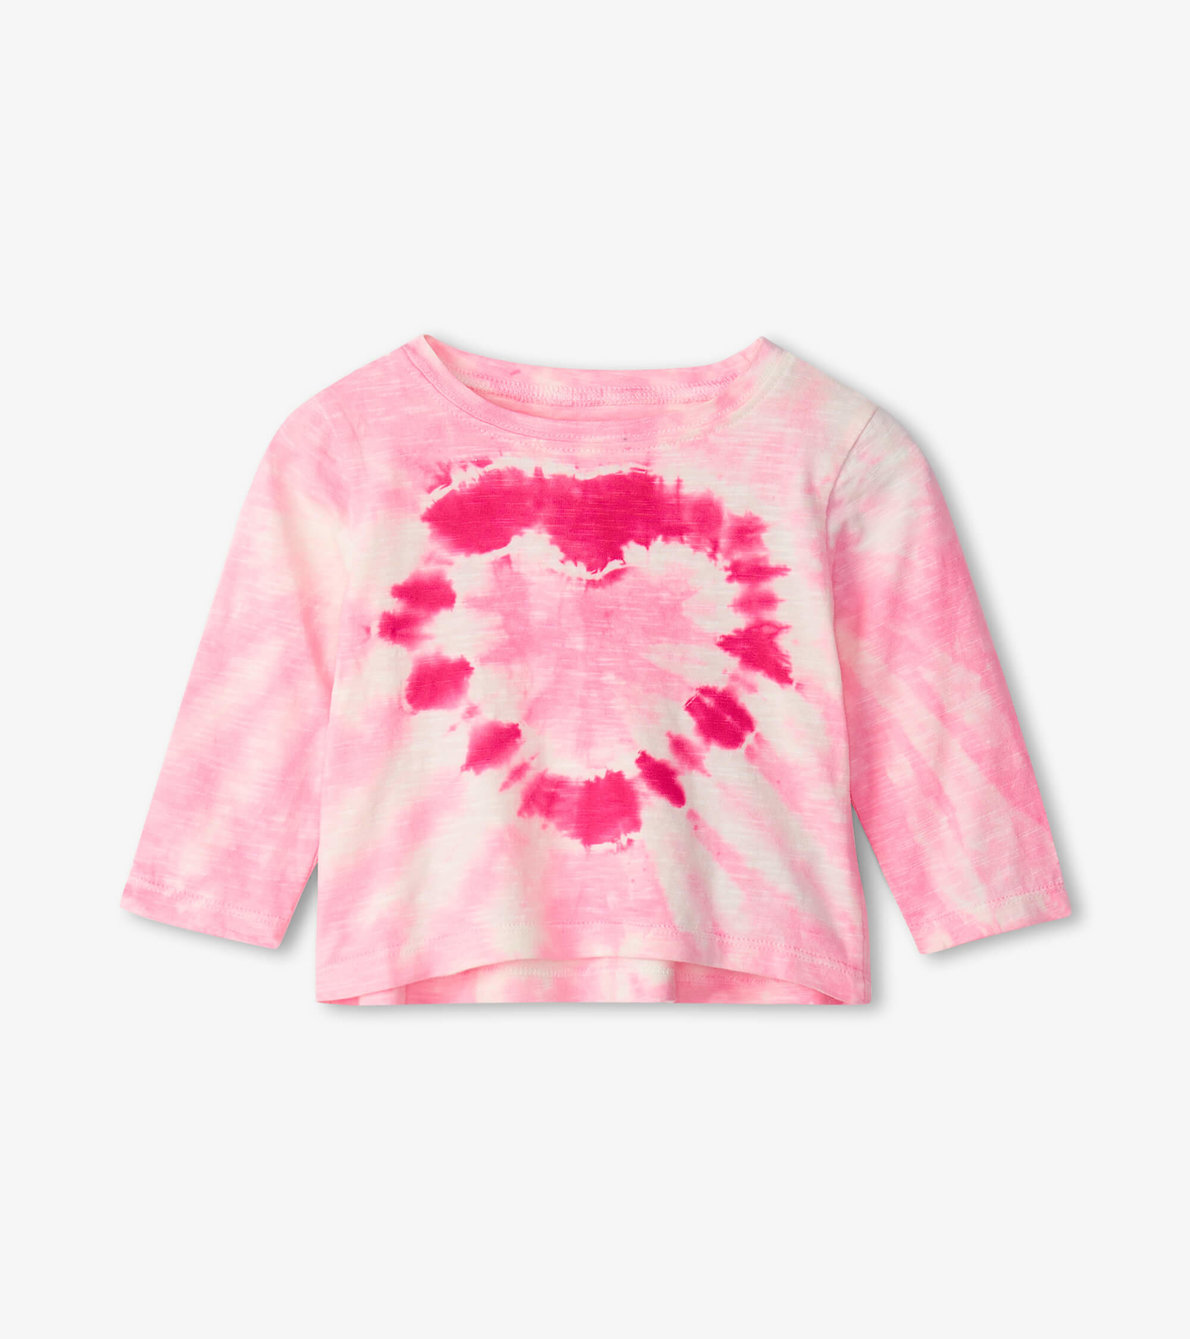 View larger image of Tie Dye Heart Long Sleeve Baby Tee